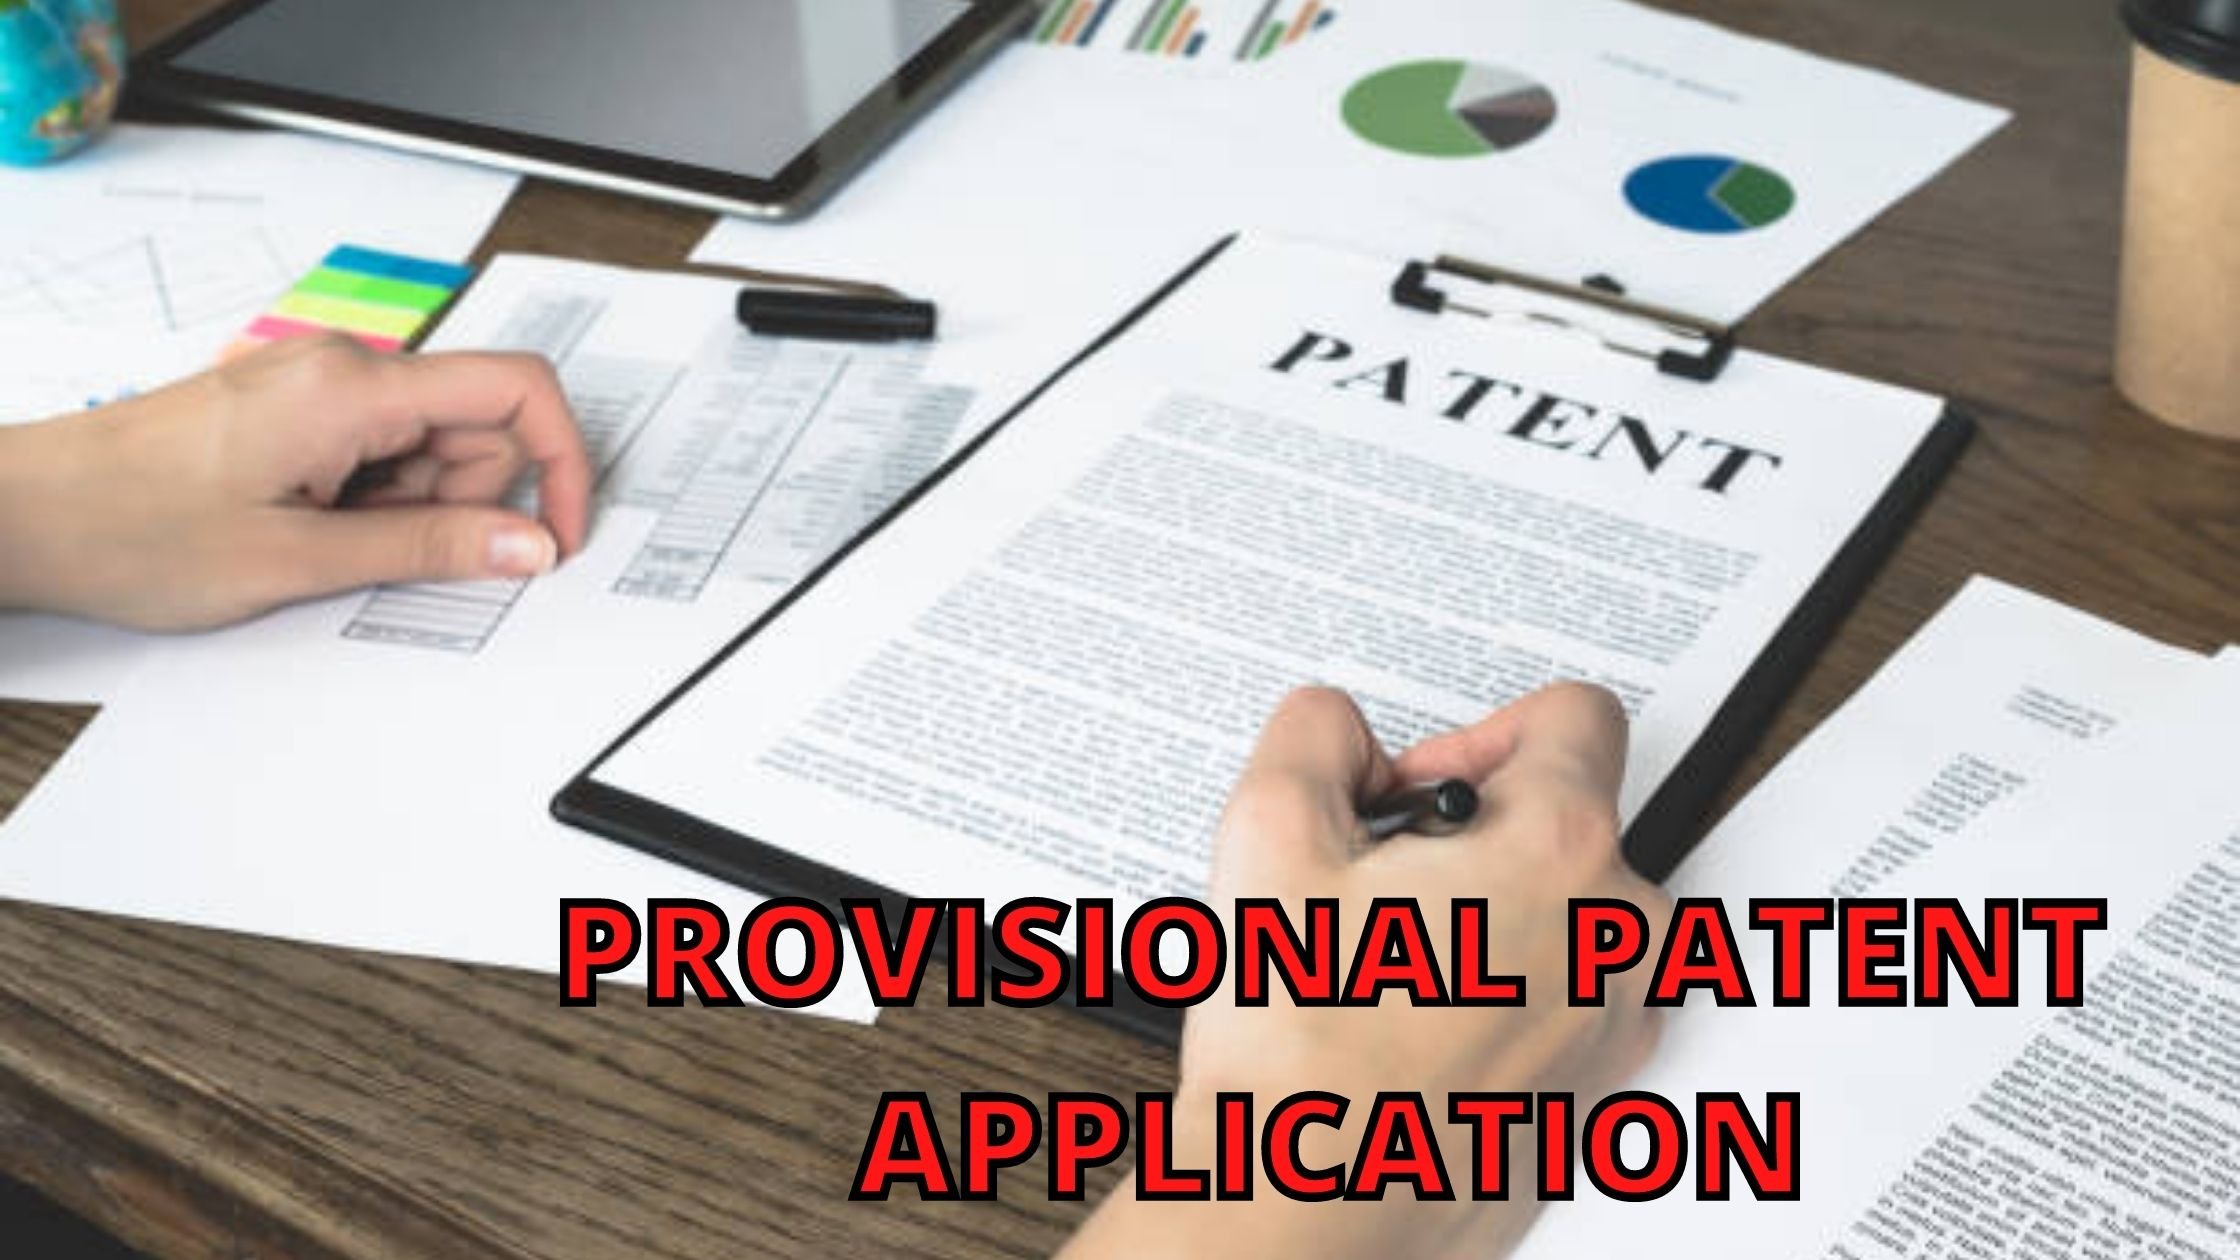 What is Provisional Patent Applications?